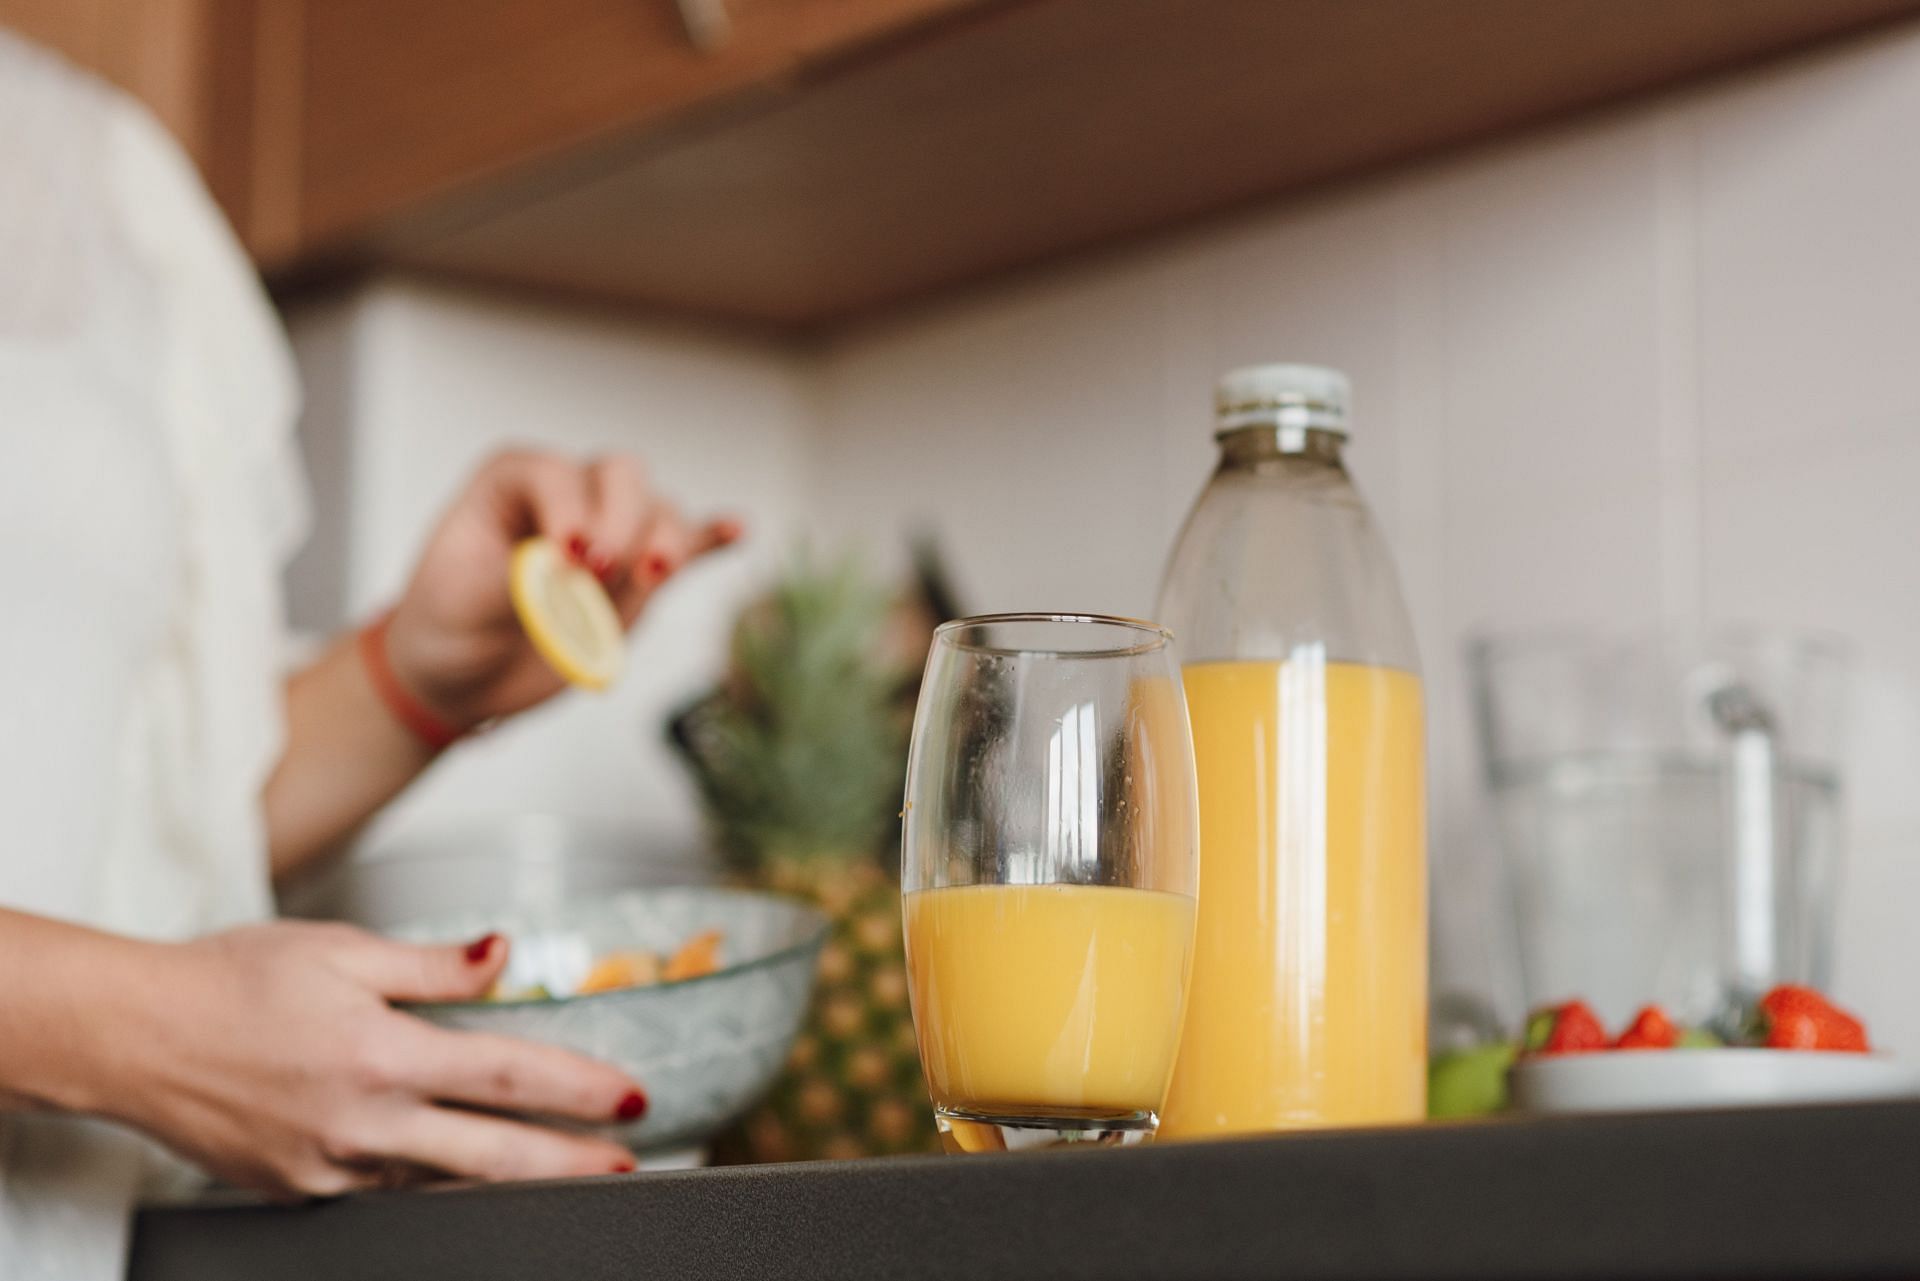 Add juice cleanses for weight loss to your diet. (Image via Pexels/ Anete Lusina)